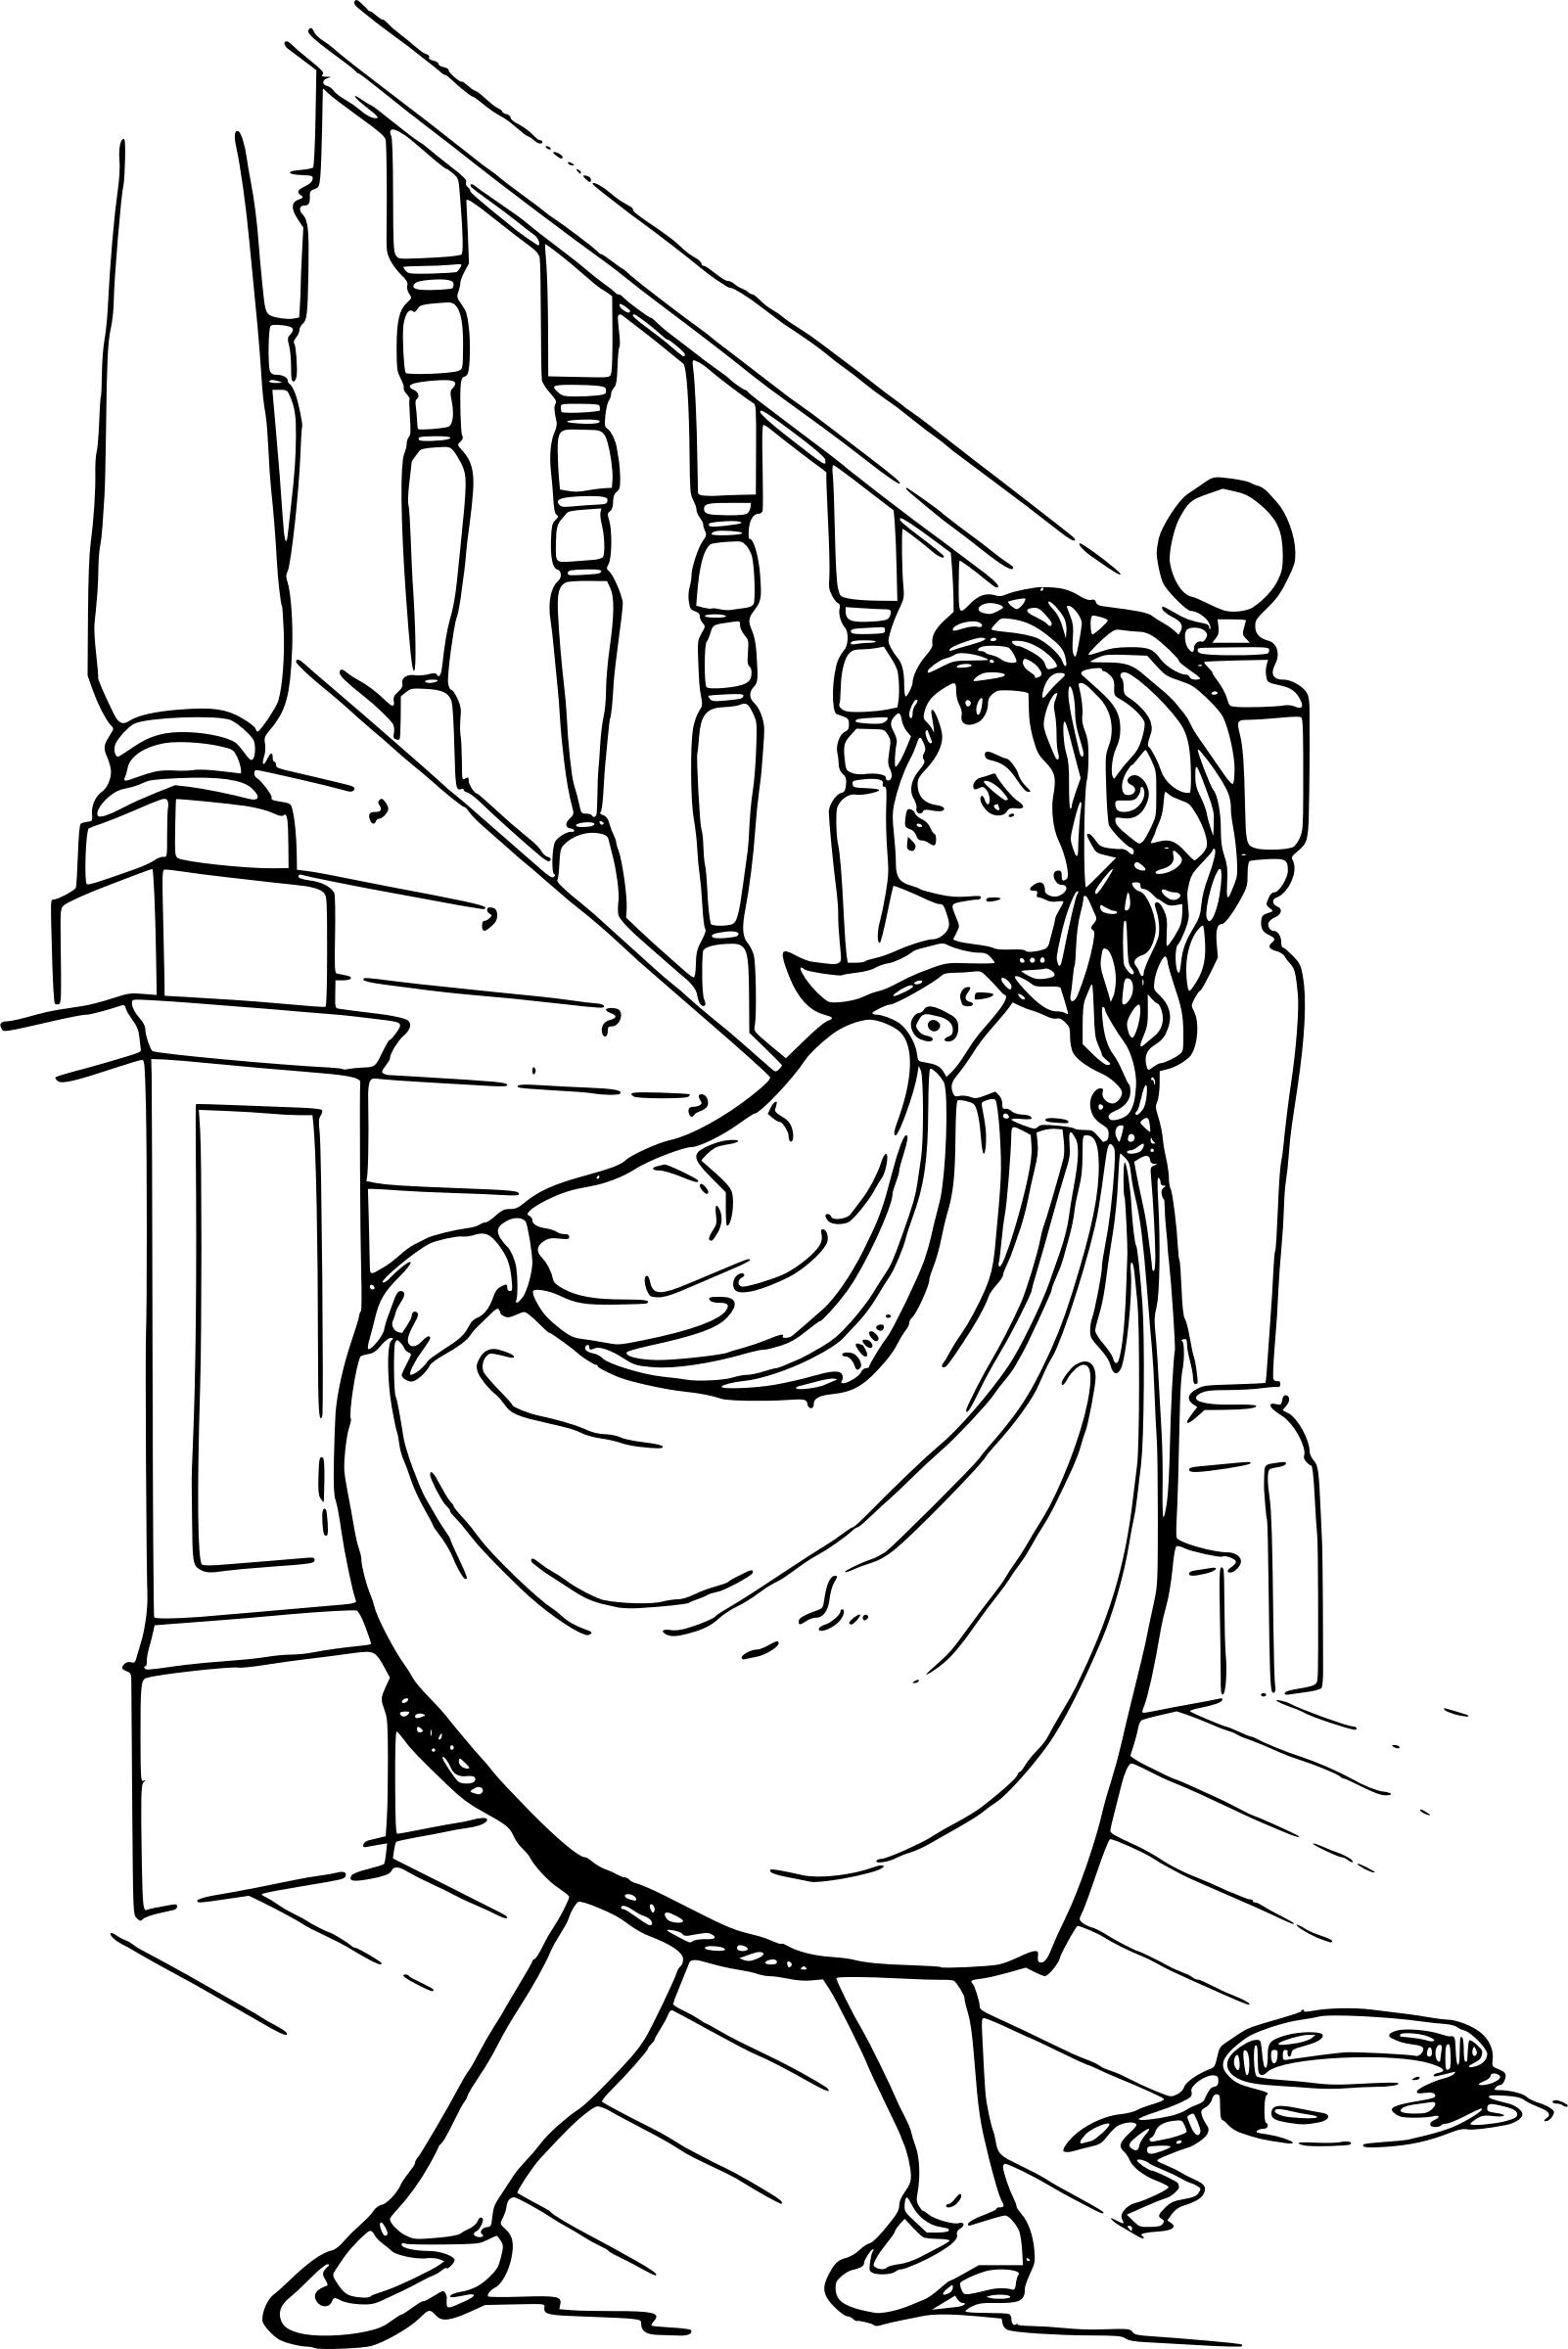 Dancing Girl and Stairs png